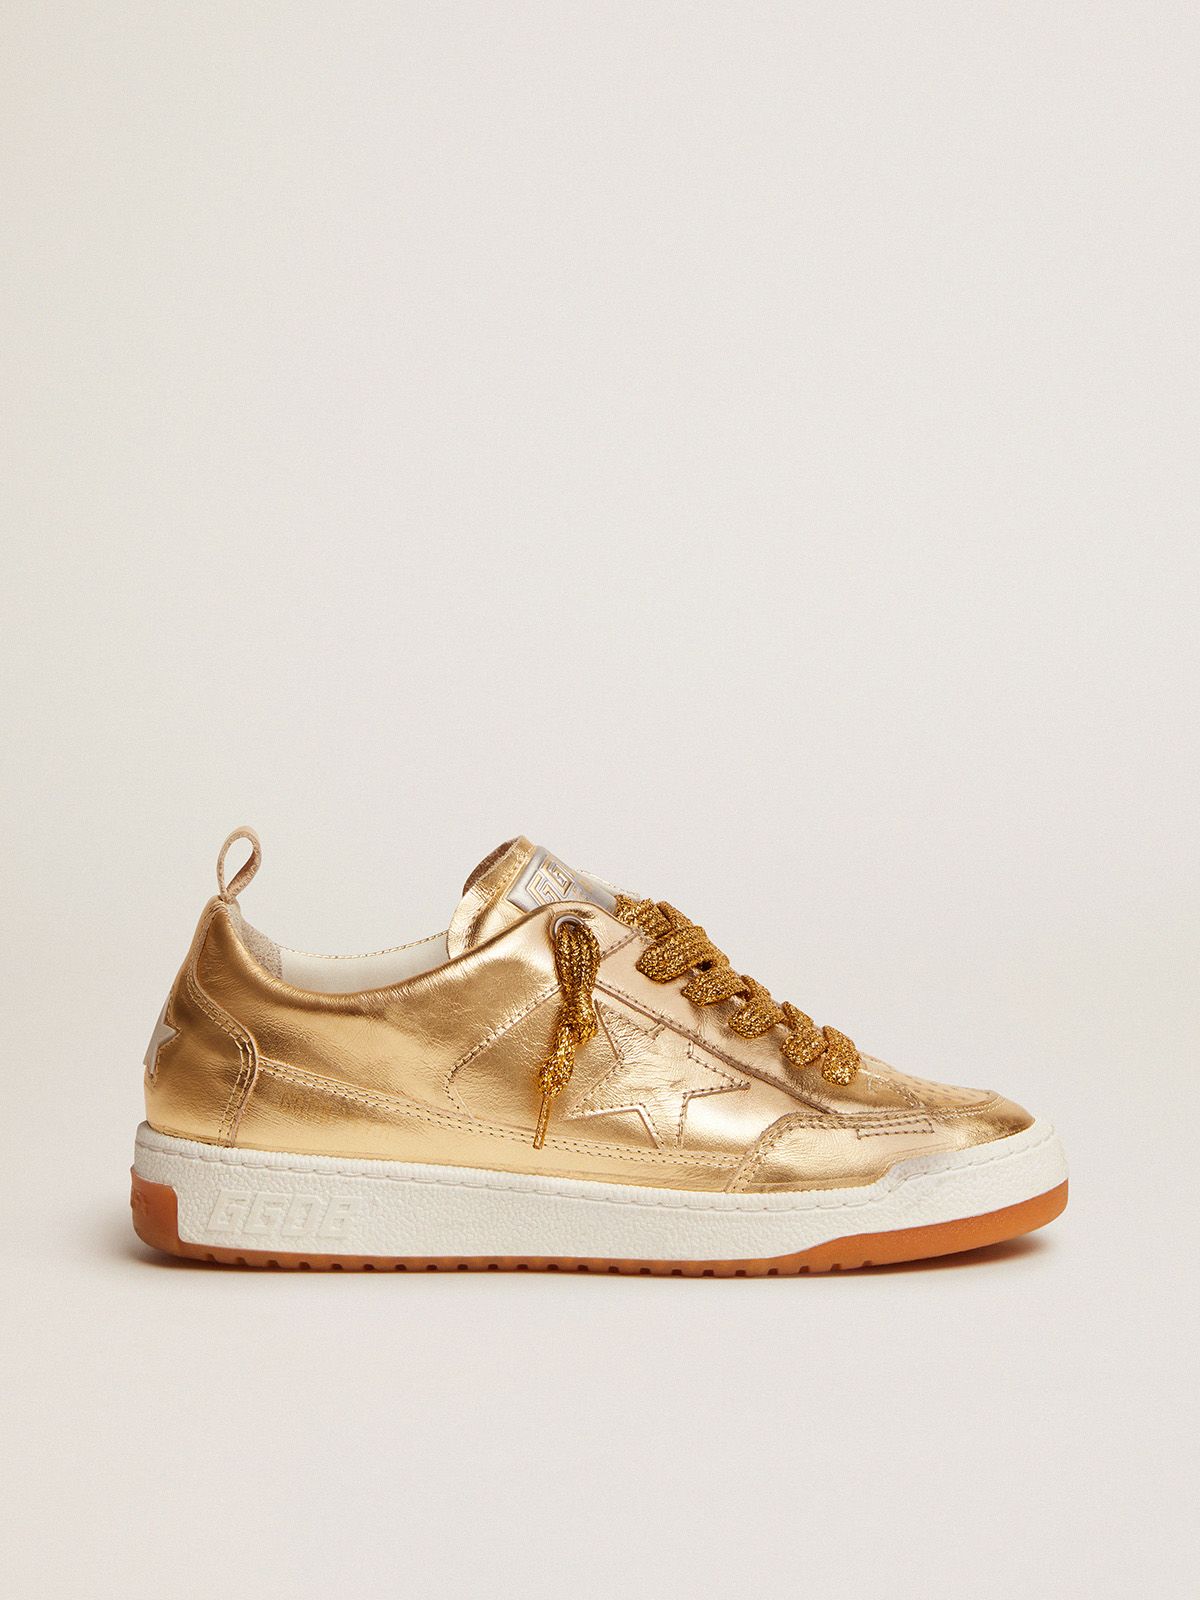 golden goose Yeah in gold leather laminated sneakers